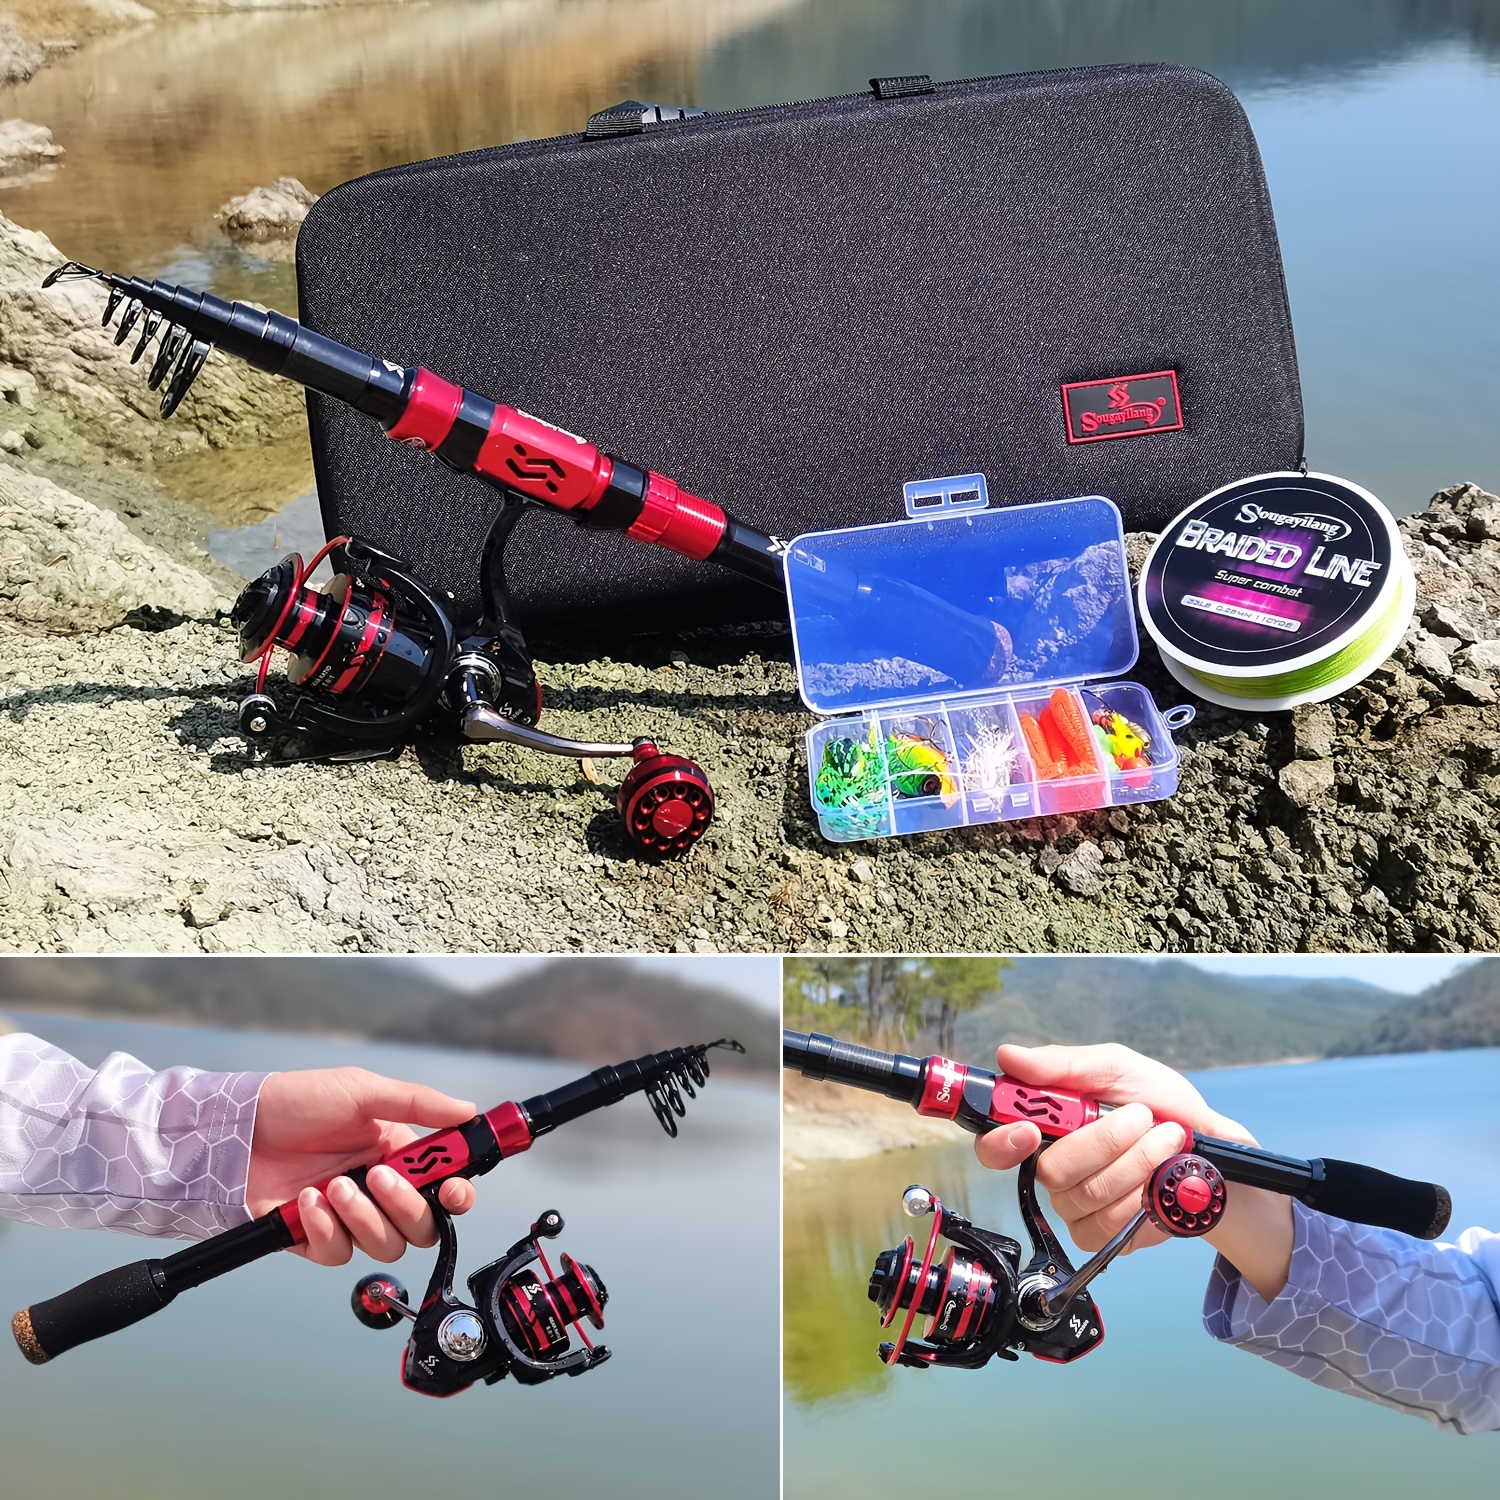 Sougayilang Fishing Rod And Reel Combos, Including Telescopic Fishing Pole,  12+1BB Spinning Reel, Fishing Lure Bait And Hook Accessories, Fishing Gear